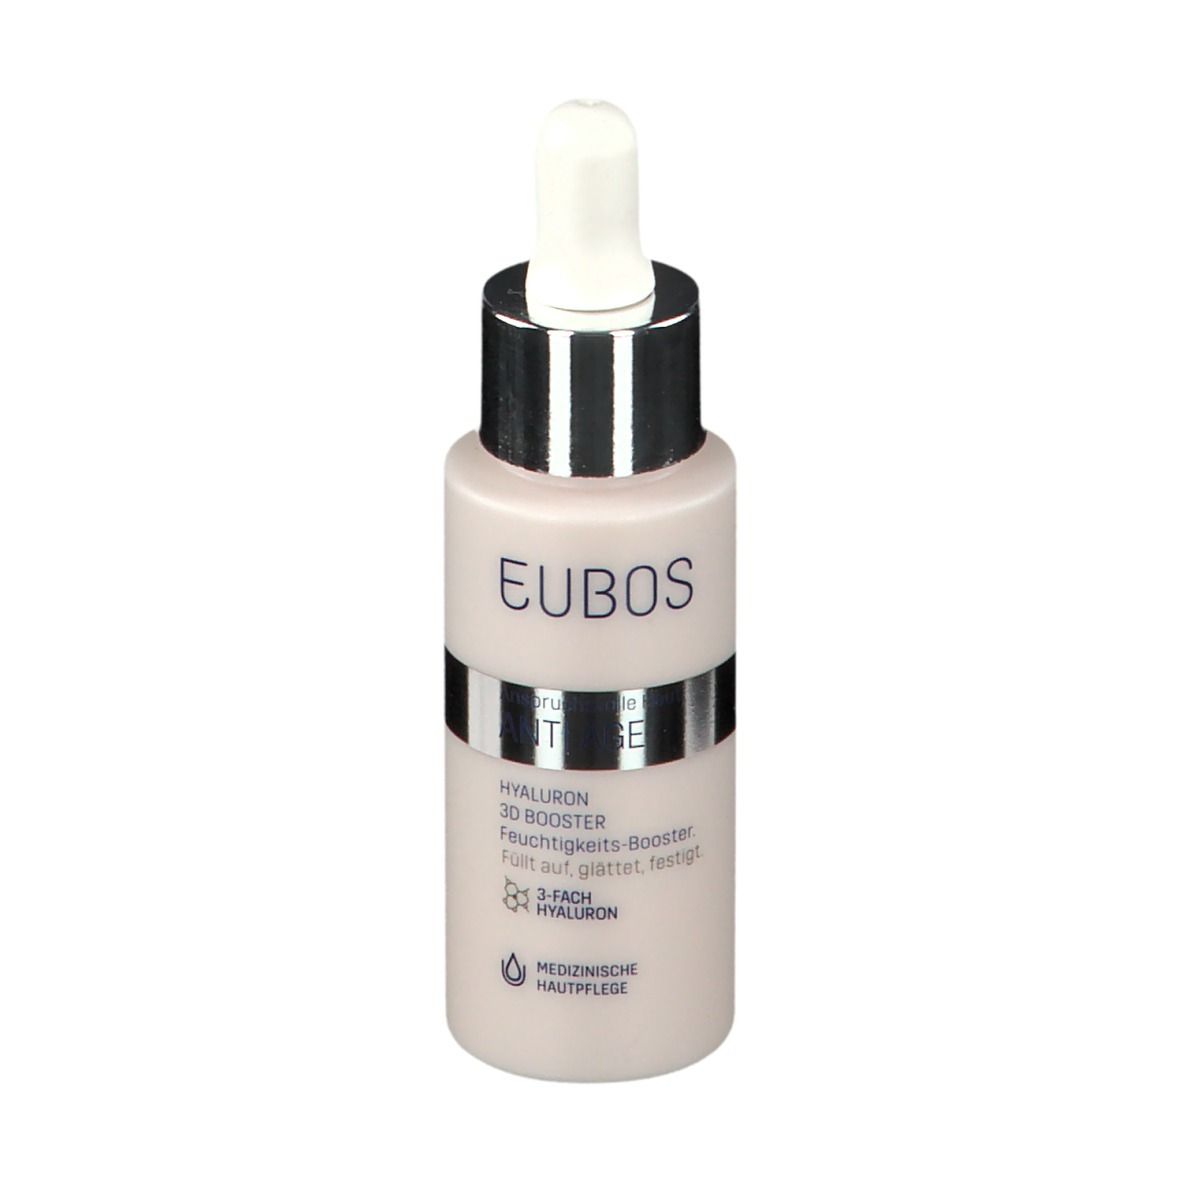 Image of EUBOS® Hyaluron 3D Booster